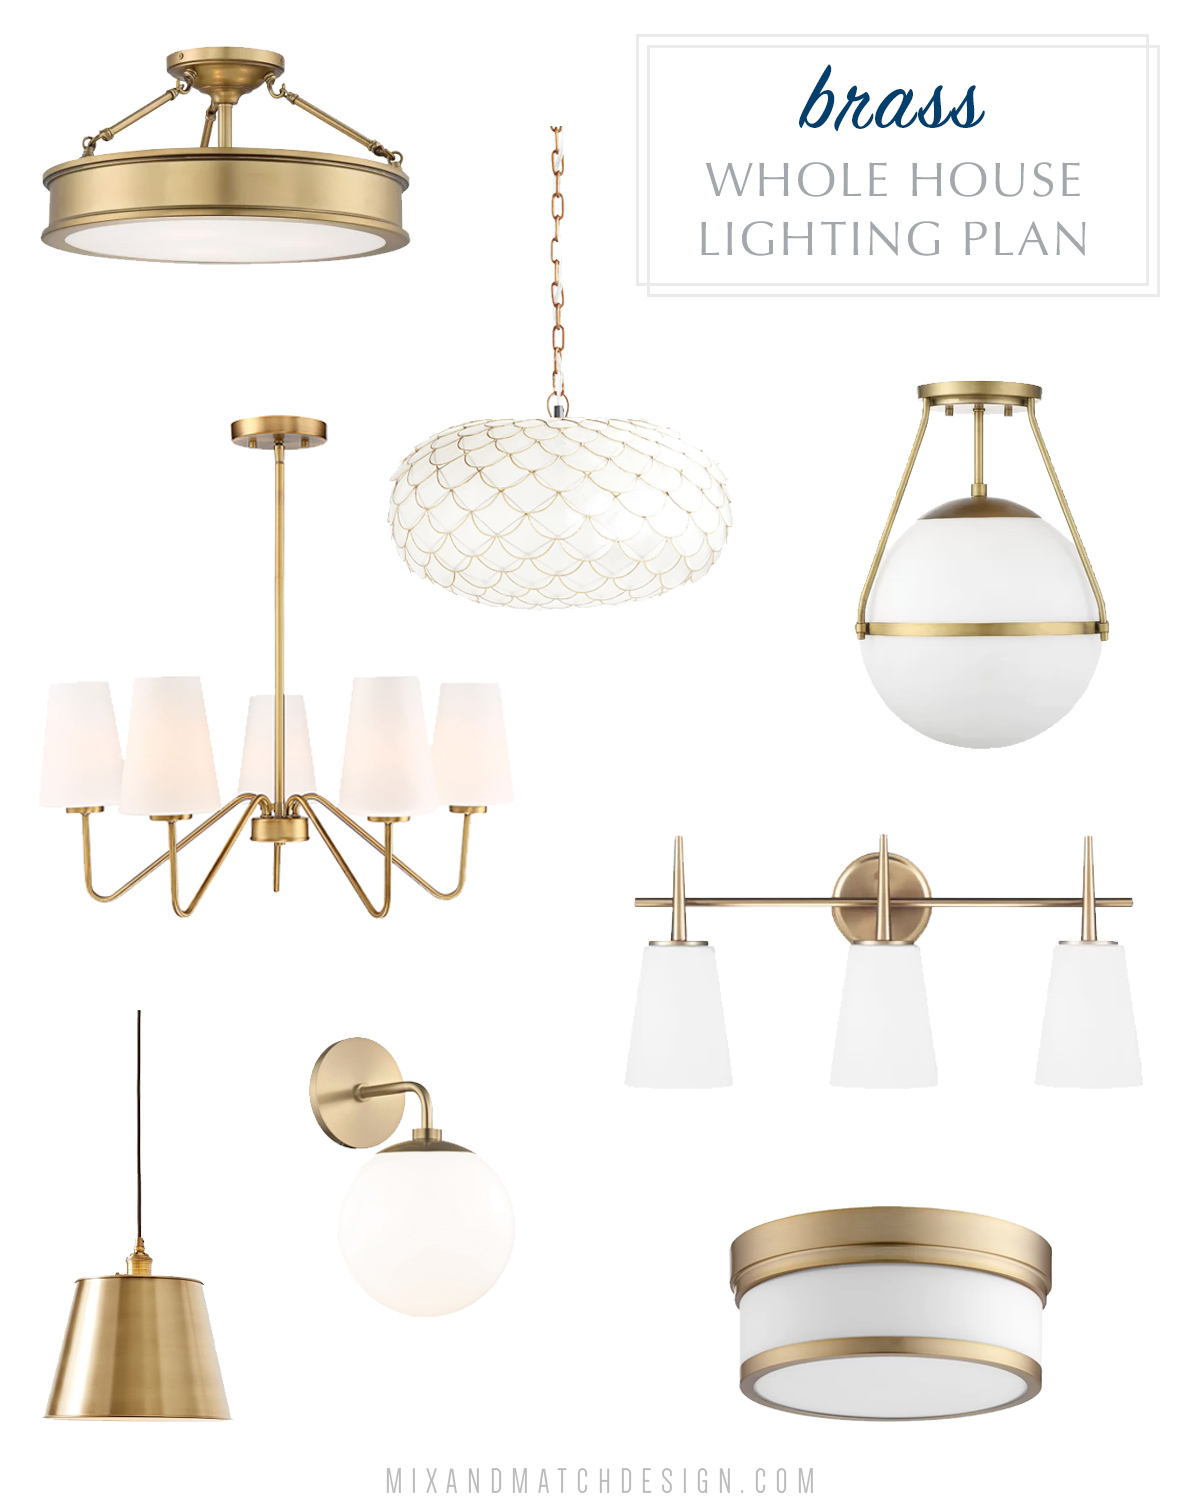 How to choose a lighting fixture for your home